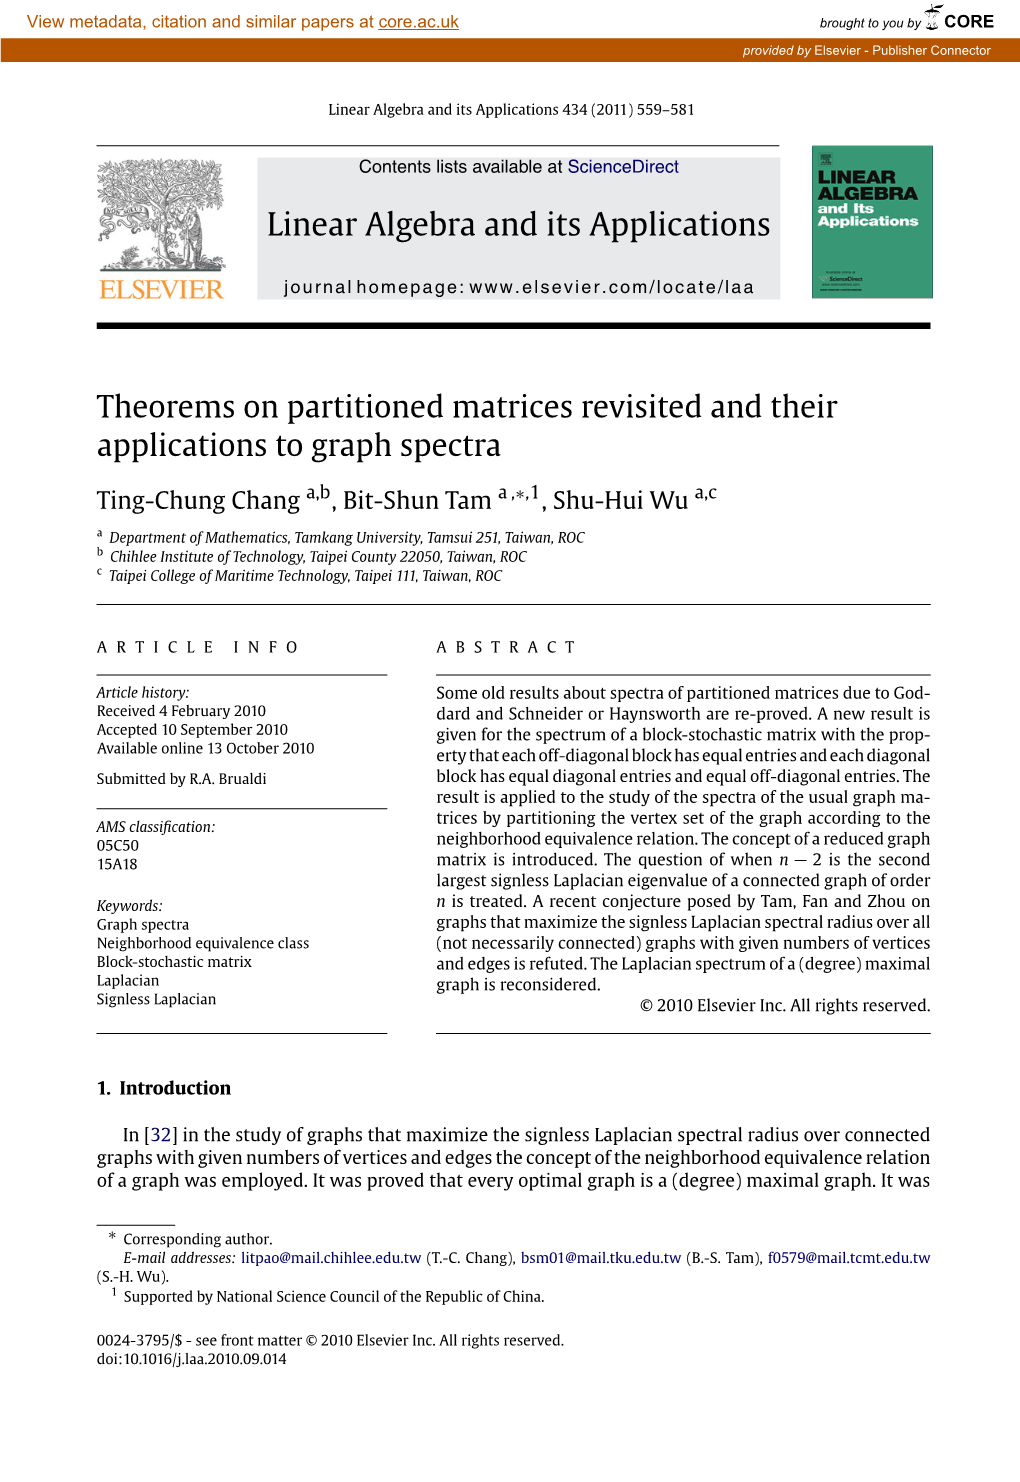 Theorems on Partitioned Matrices Revisited and Their Applications to Graph Spectra